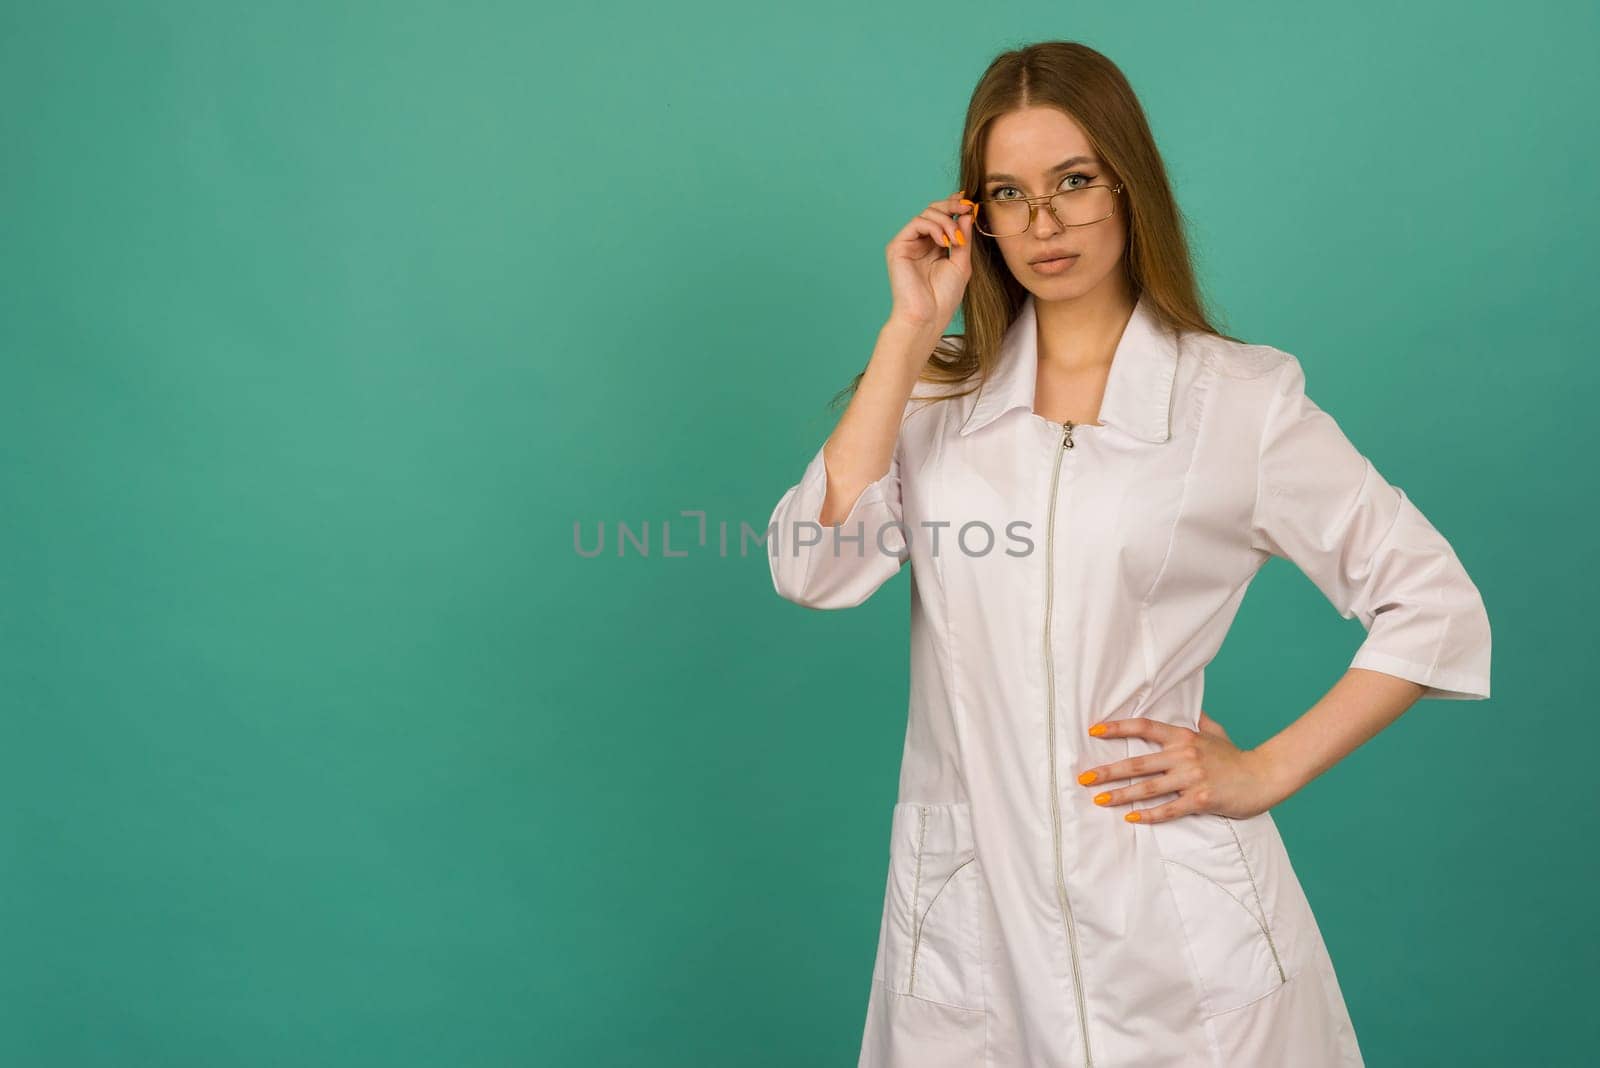 Beautiful smiling sexy nurse or femele doctor standing isjlated on background .